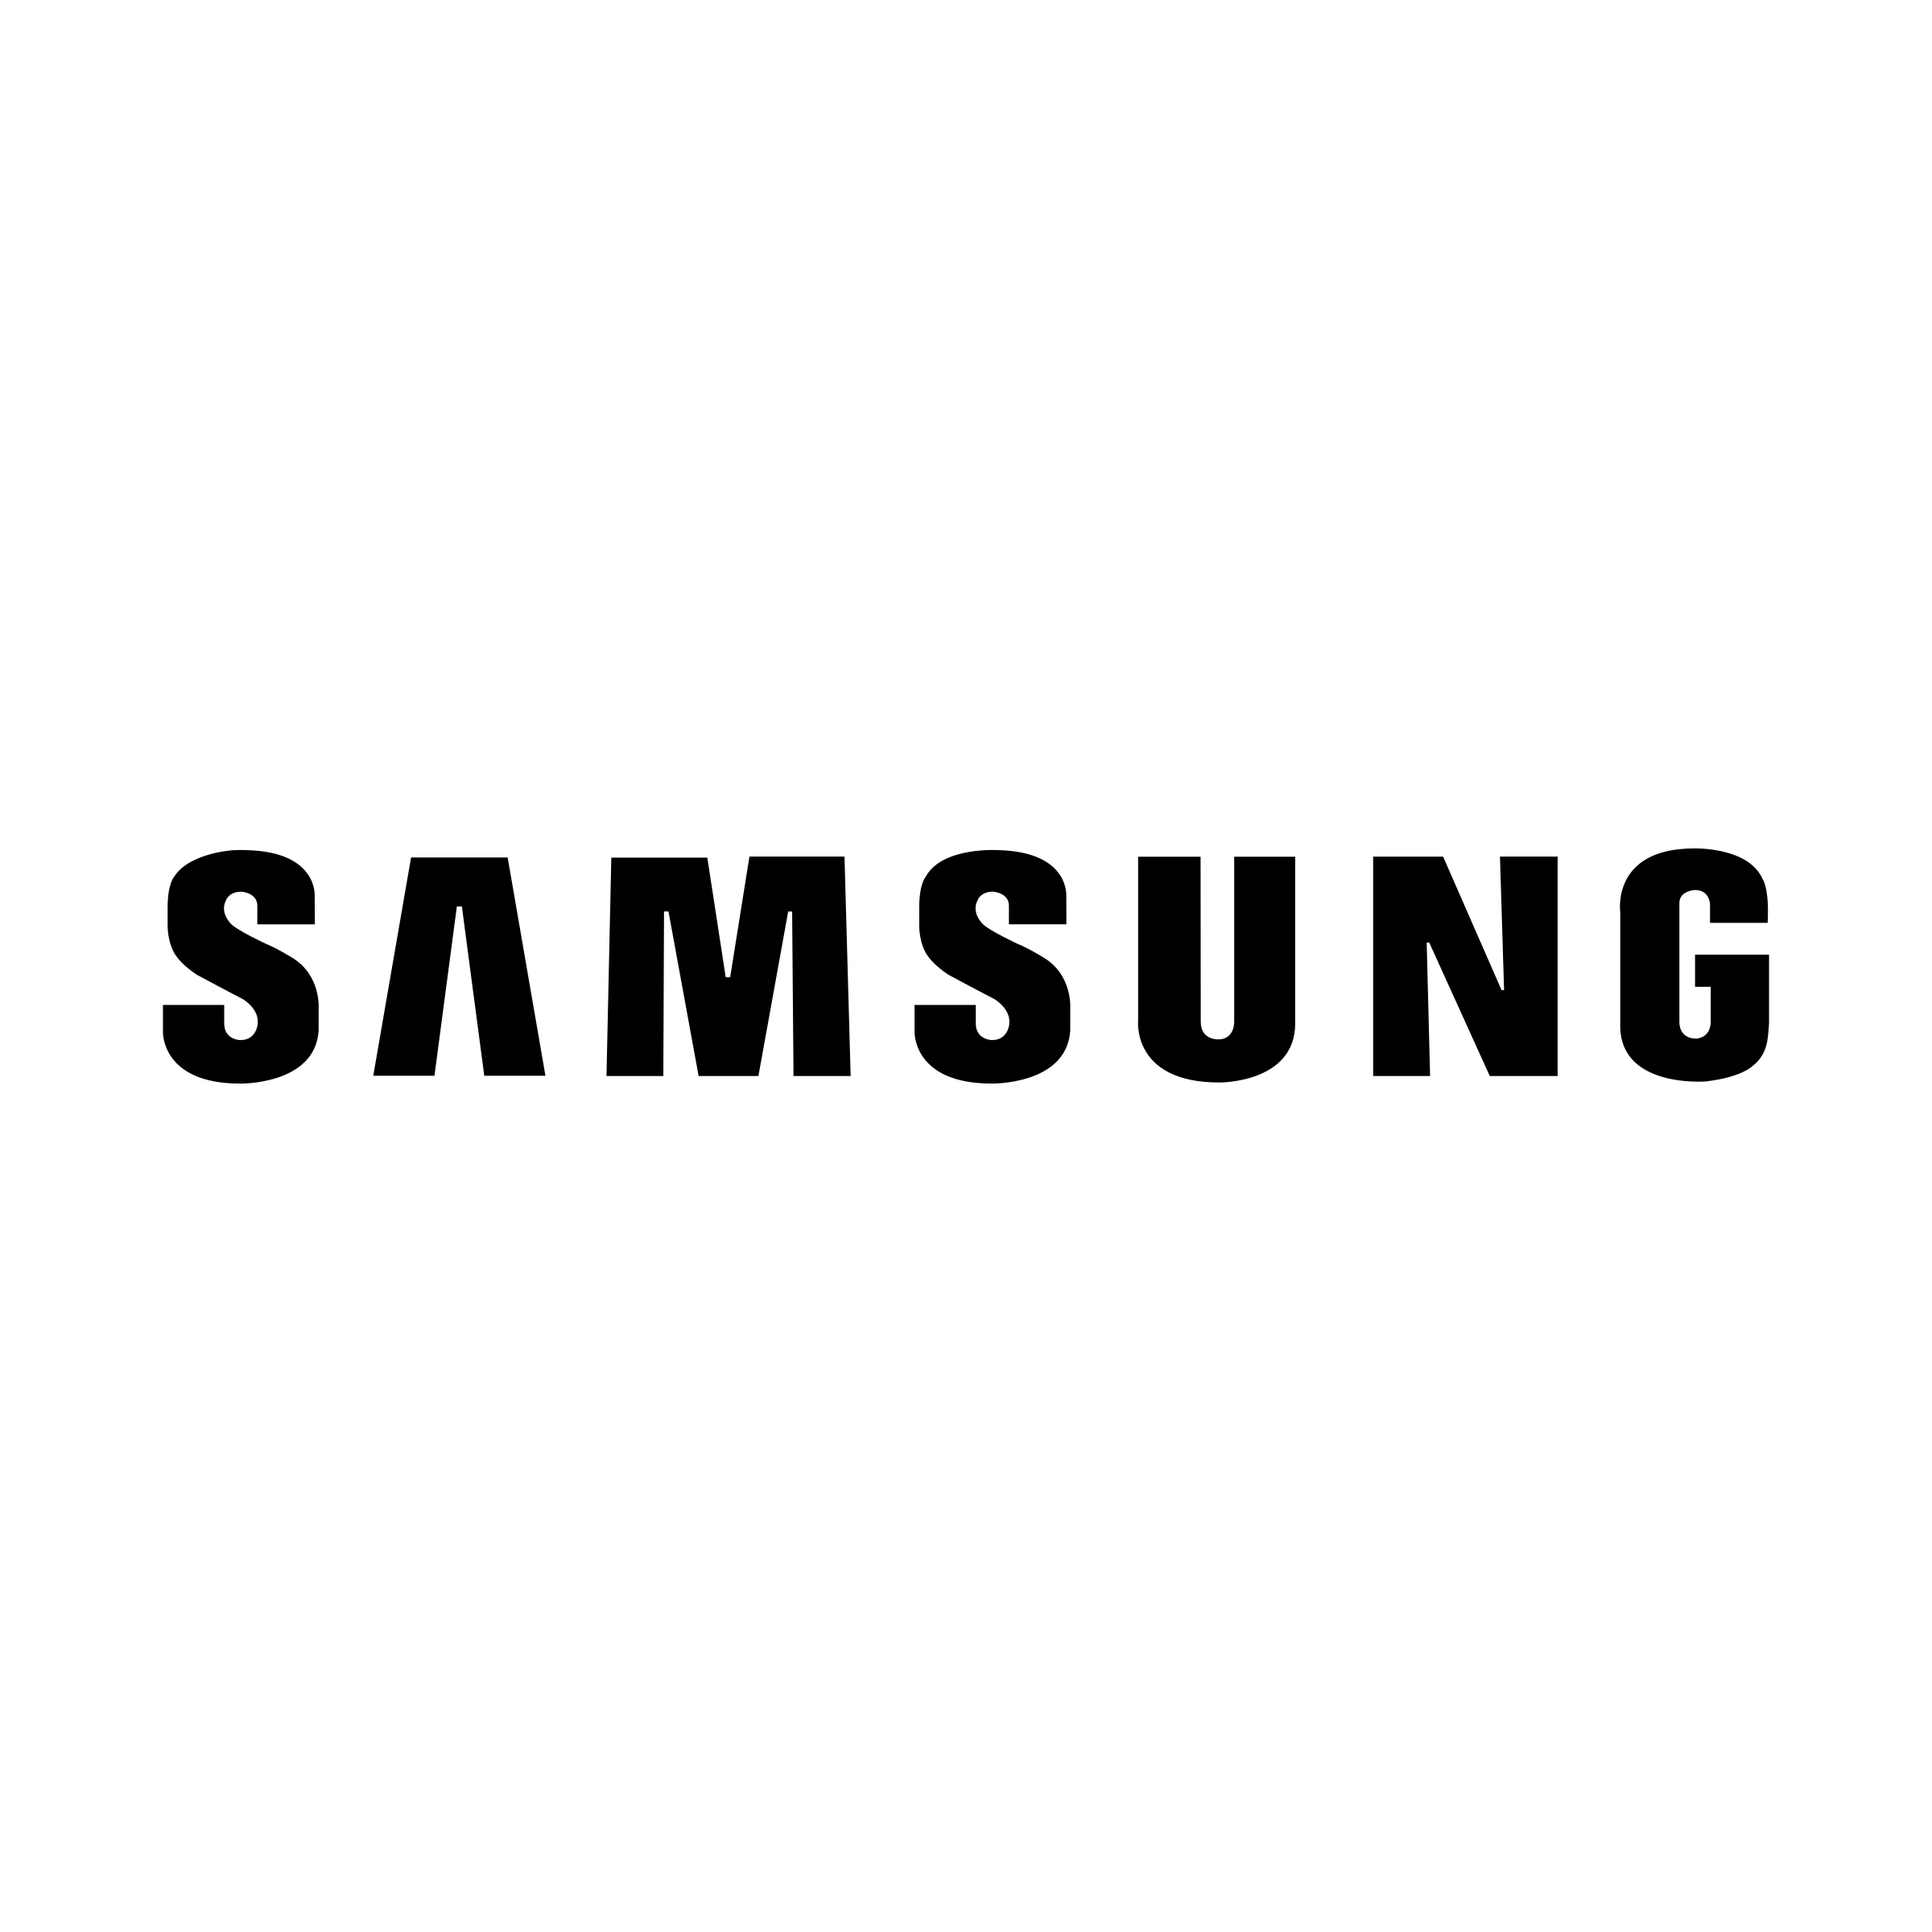 samsung-1-logo-black-and-white.png